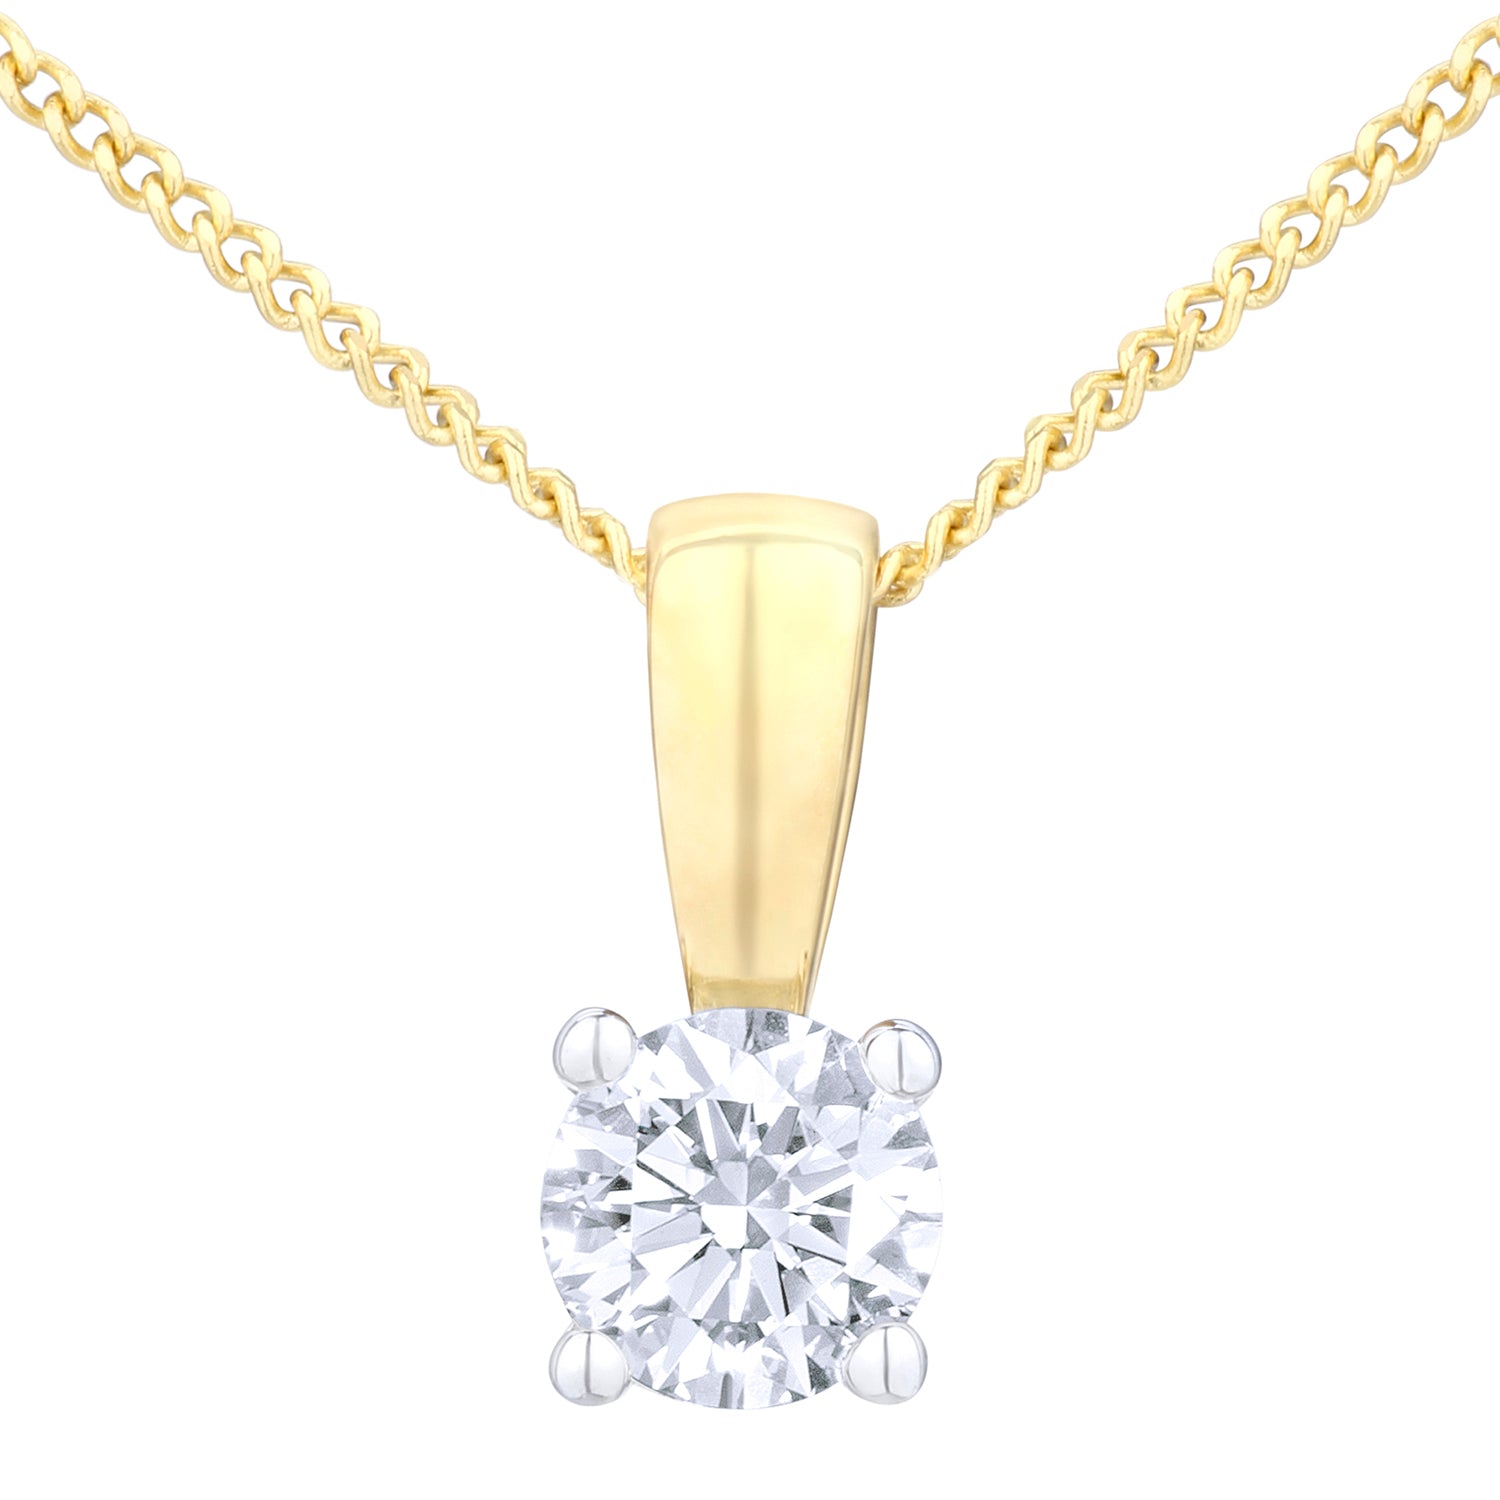 18ct Gold  Round 1/4ct Diamond Solitaire Pendant Necklace 18 inch - PP0AXL4203Y18GVS